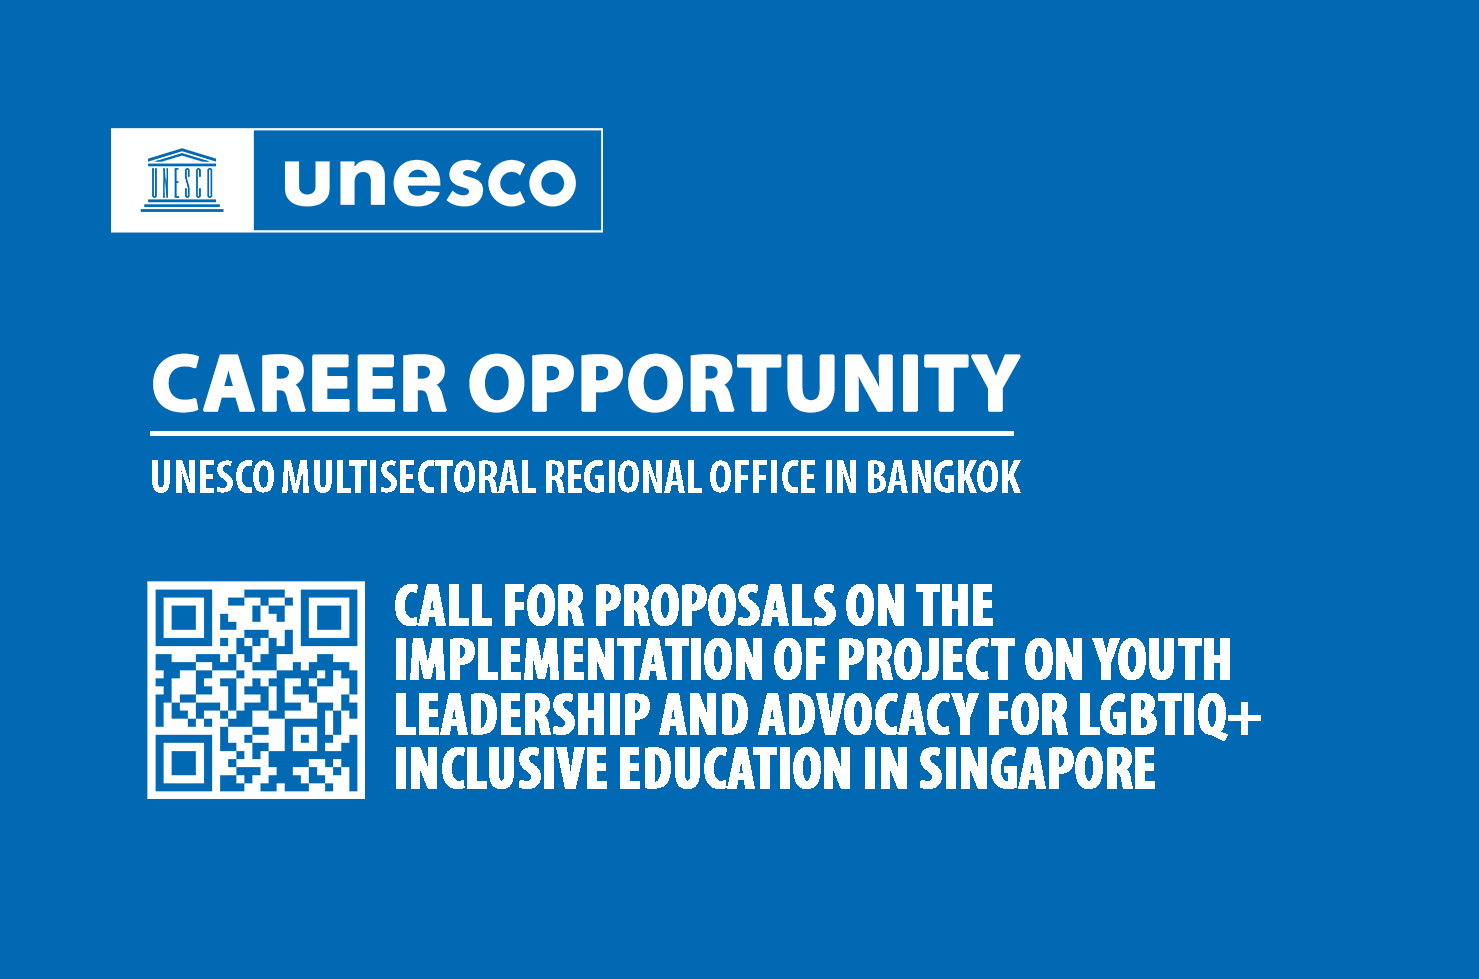 Call for Proposals on the Implementation of Project on Youth Leadership and Advocacy for LGBTIQ+ Inclusive Education in Singapore